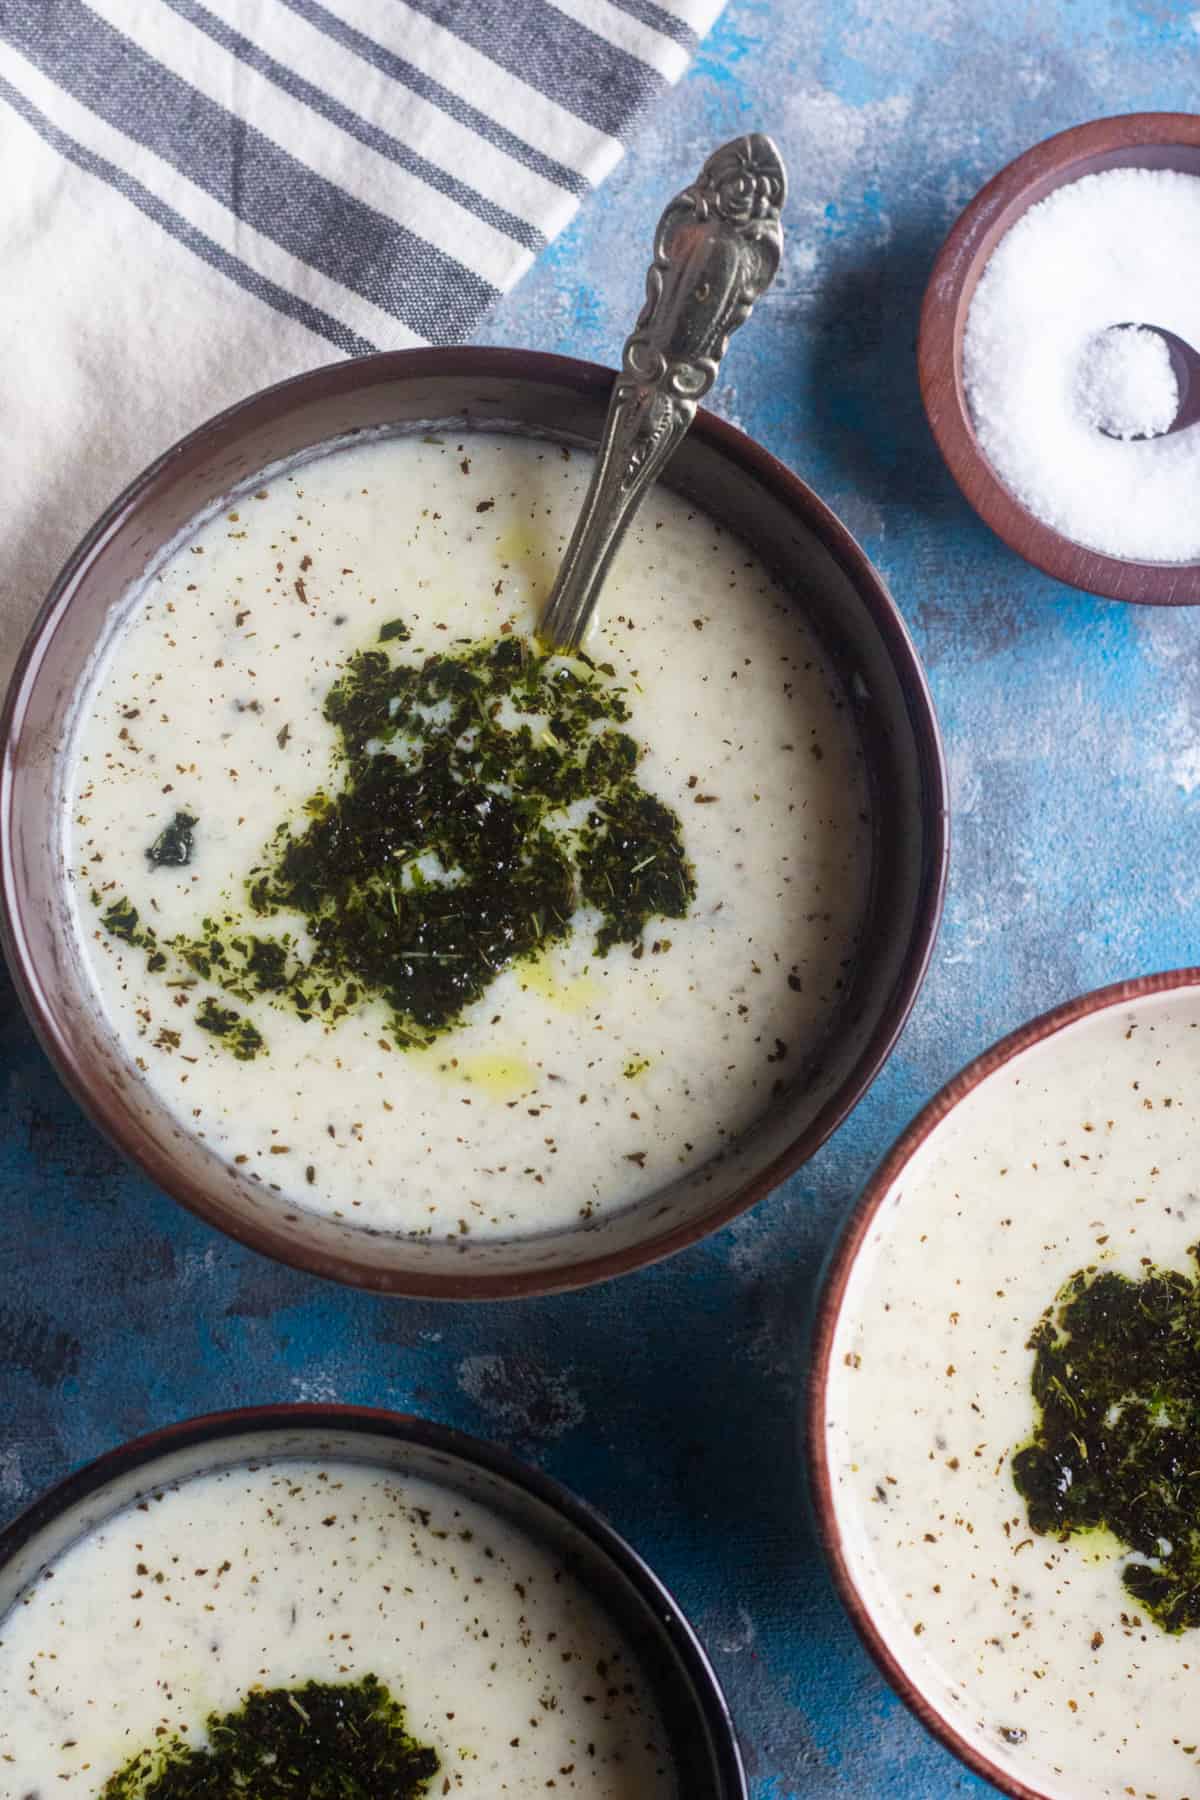 Turkish yogurt soup is a delicious light meal on its own .